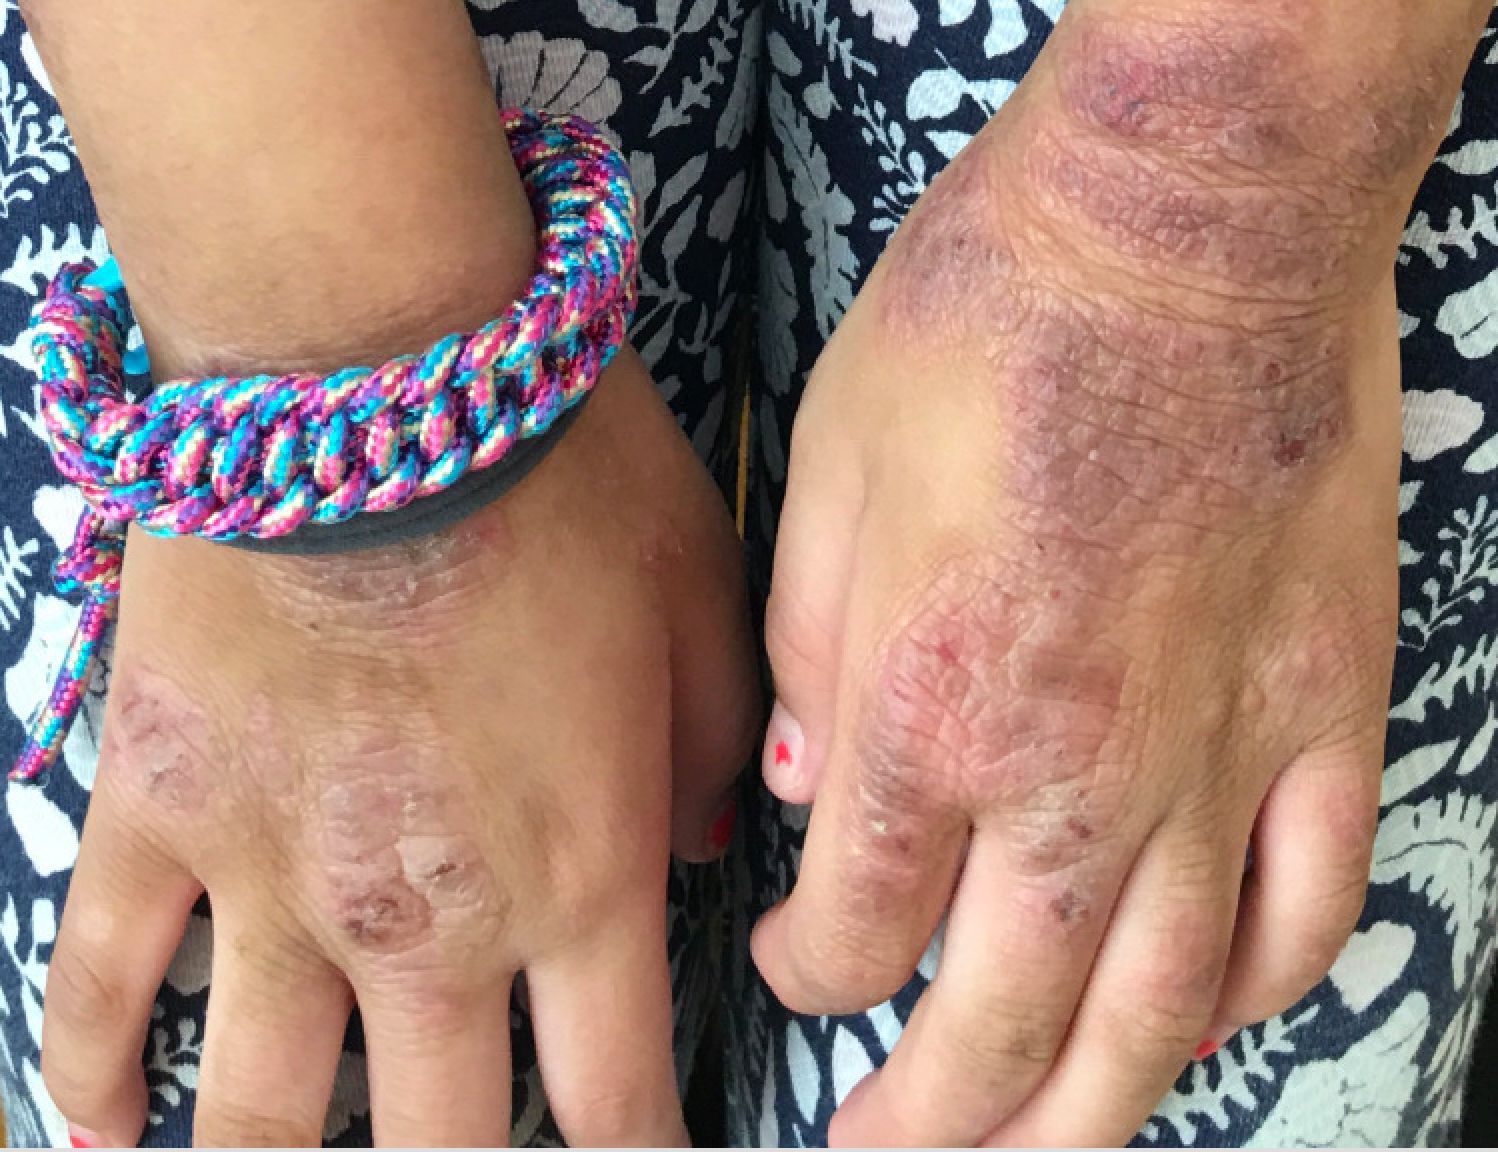 Hyperkeratotic plaques and fi ssures on the palms